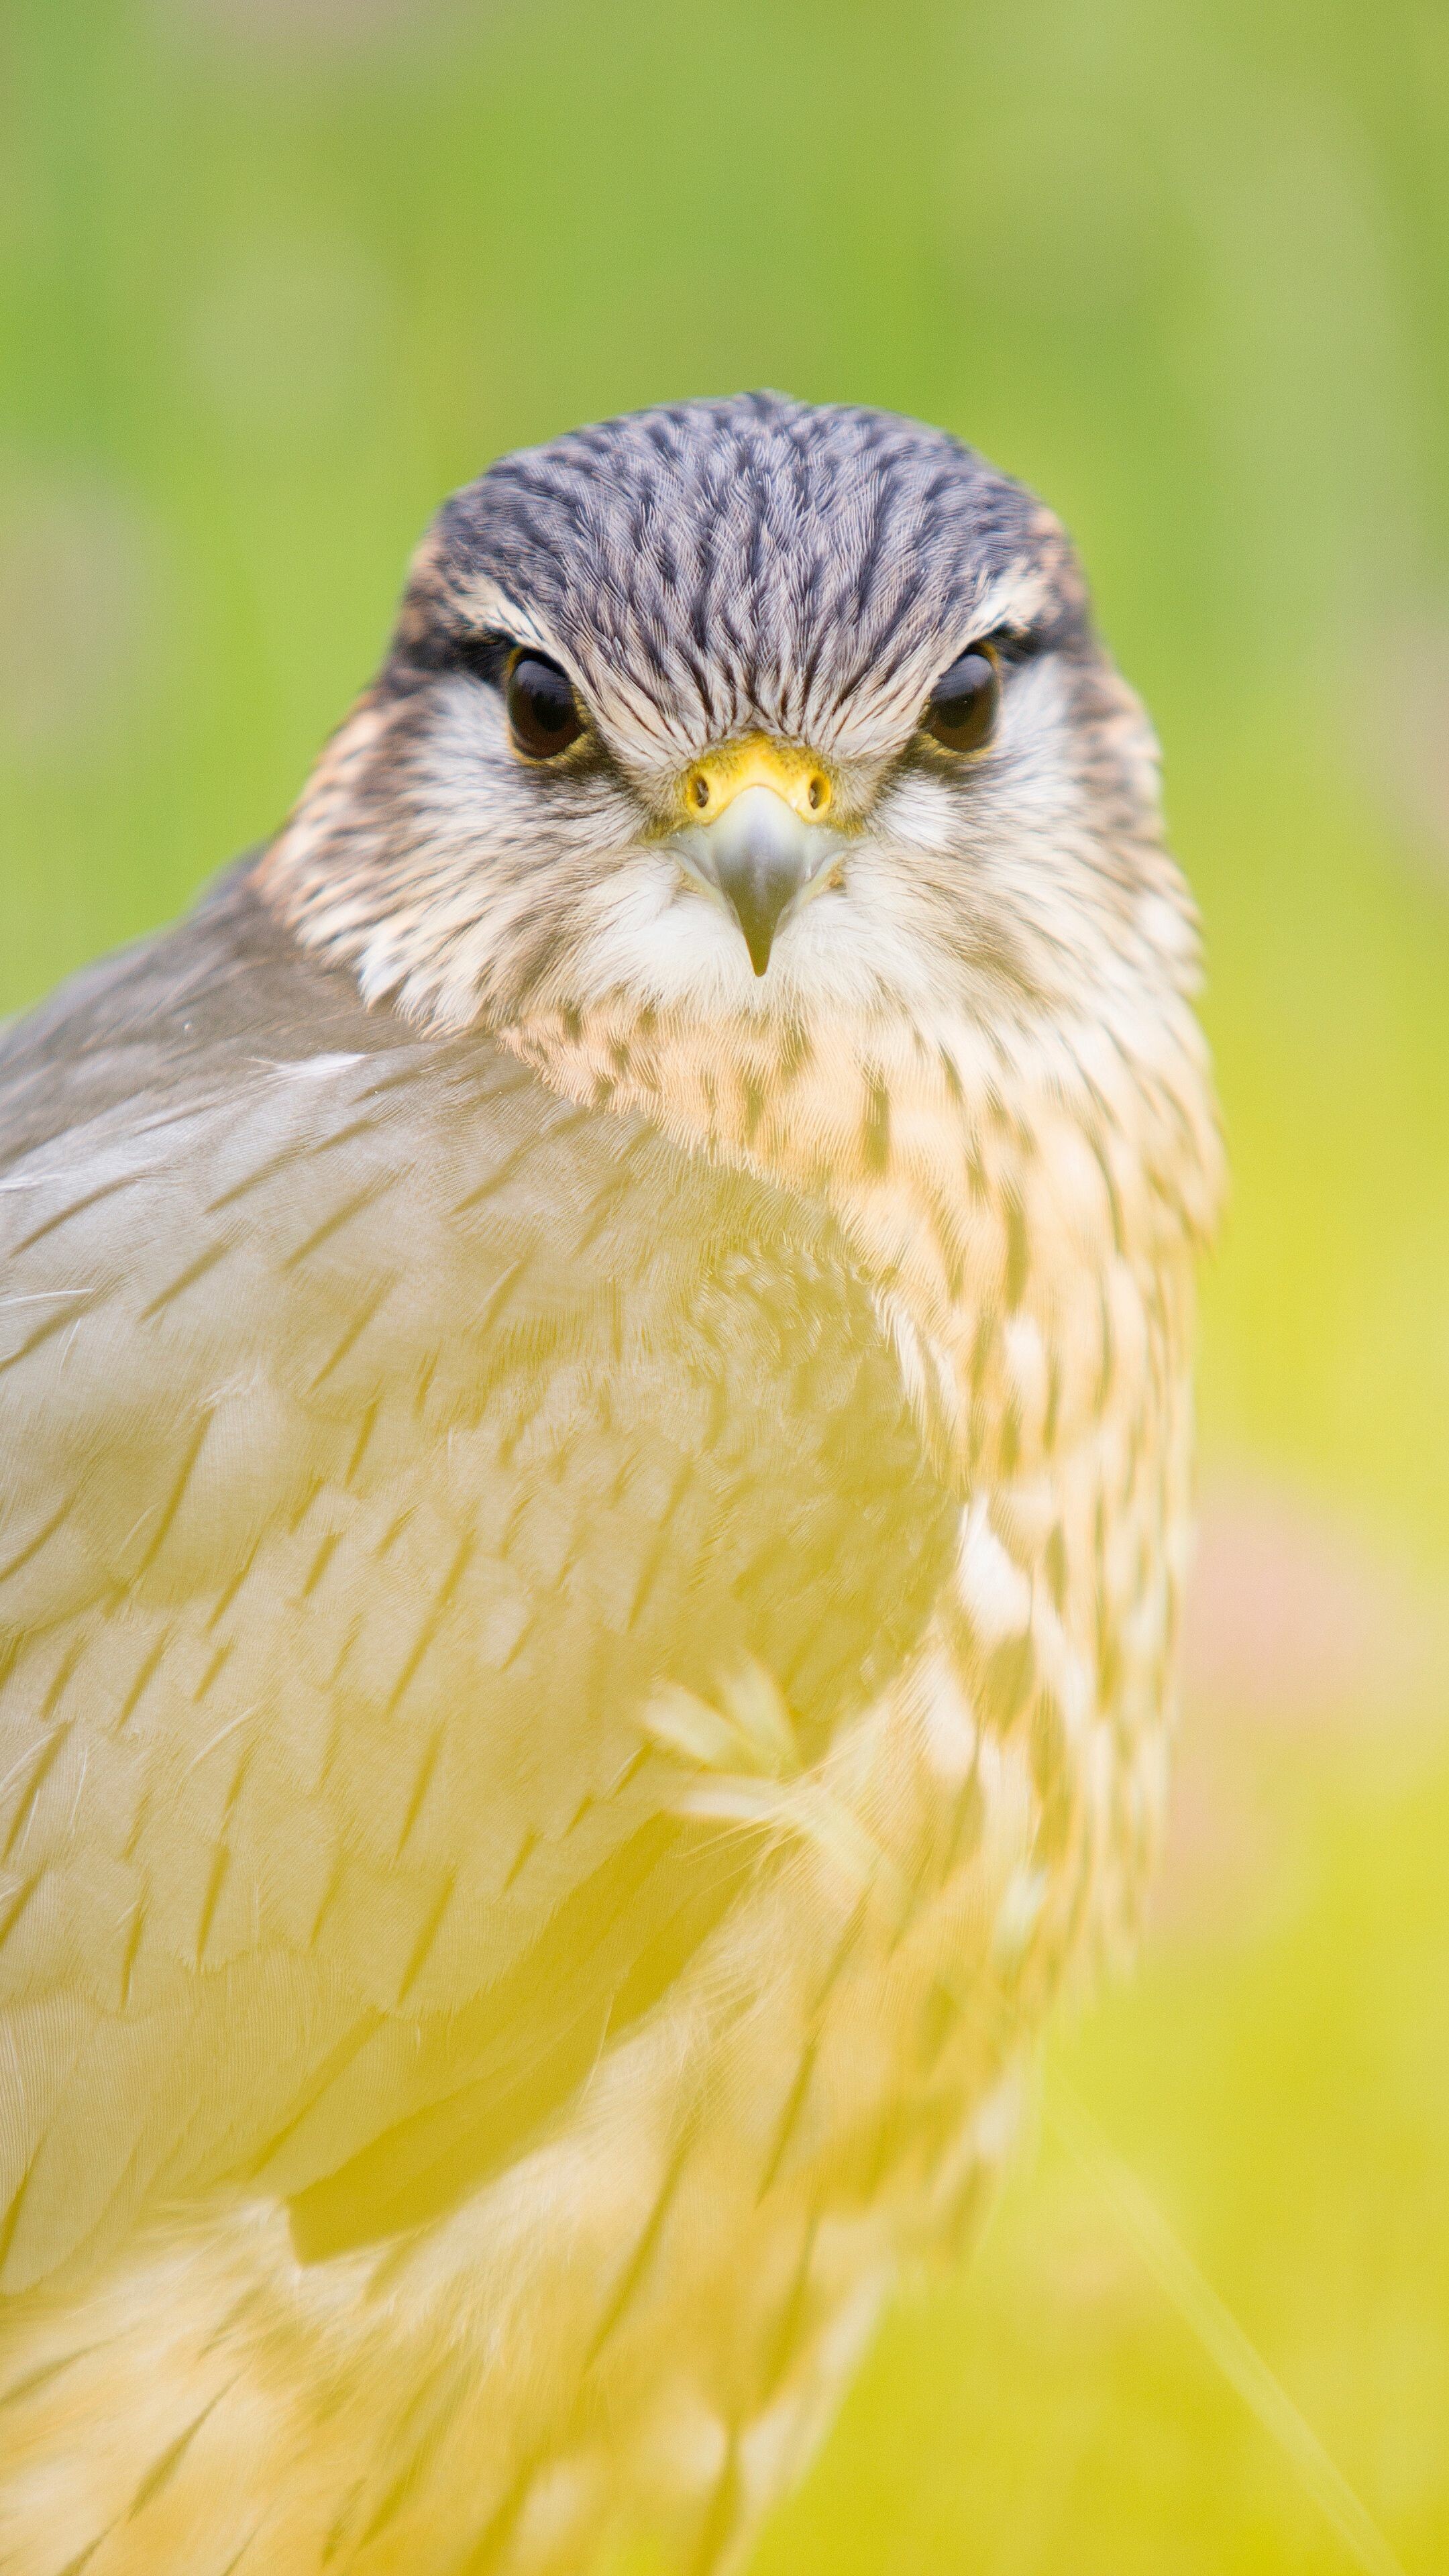 Bird: The red-tailed hawk, Predator of small mammals such as rodents. 2160x3840 4K Wallpaper.